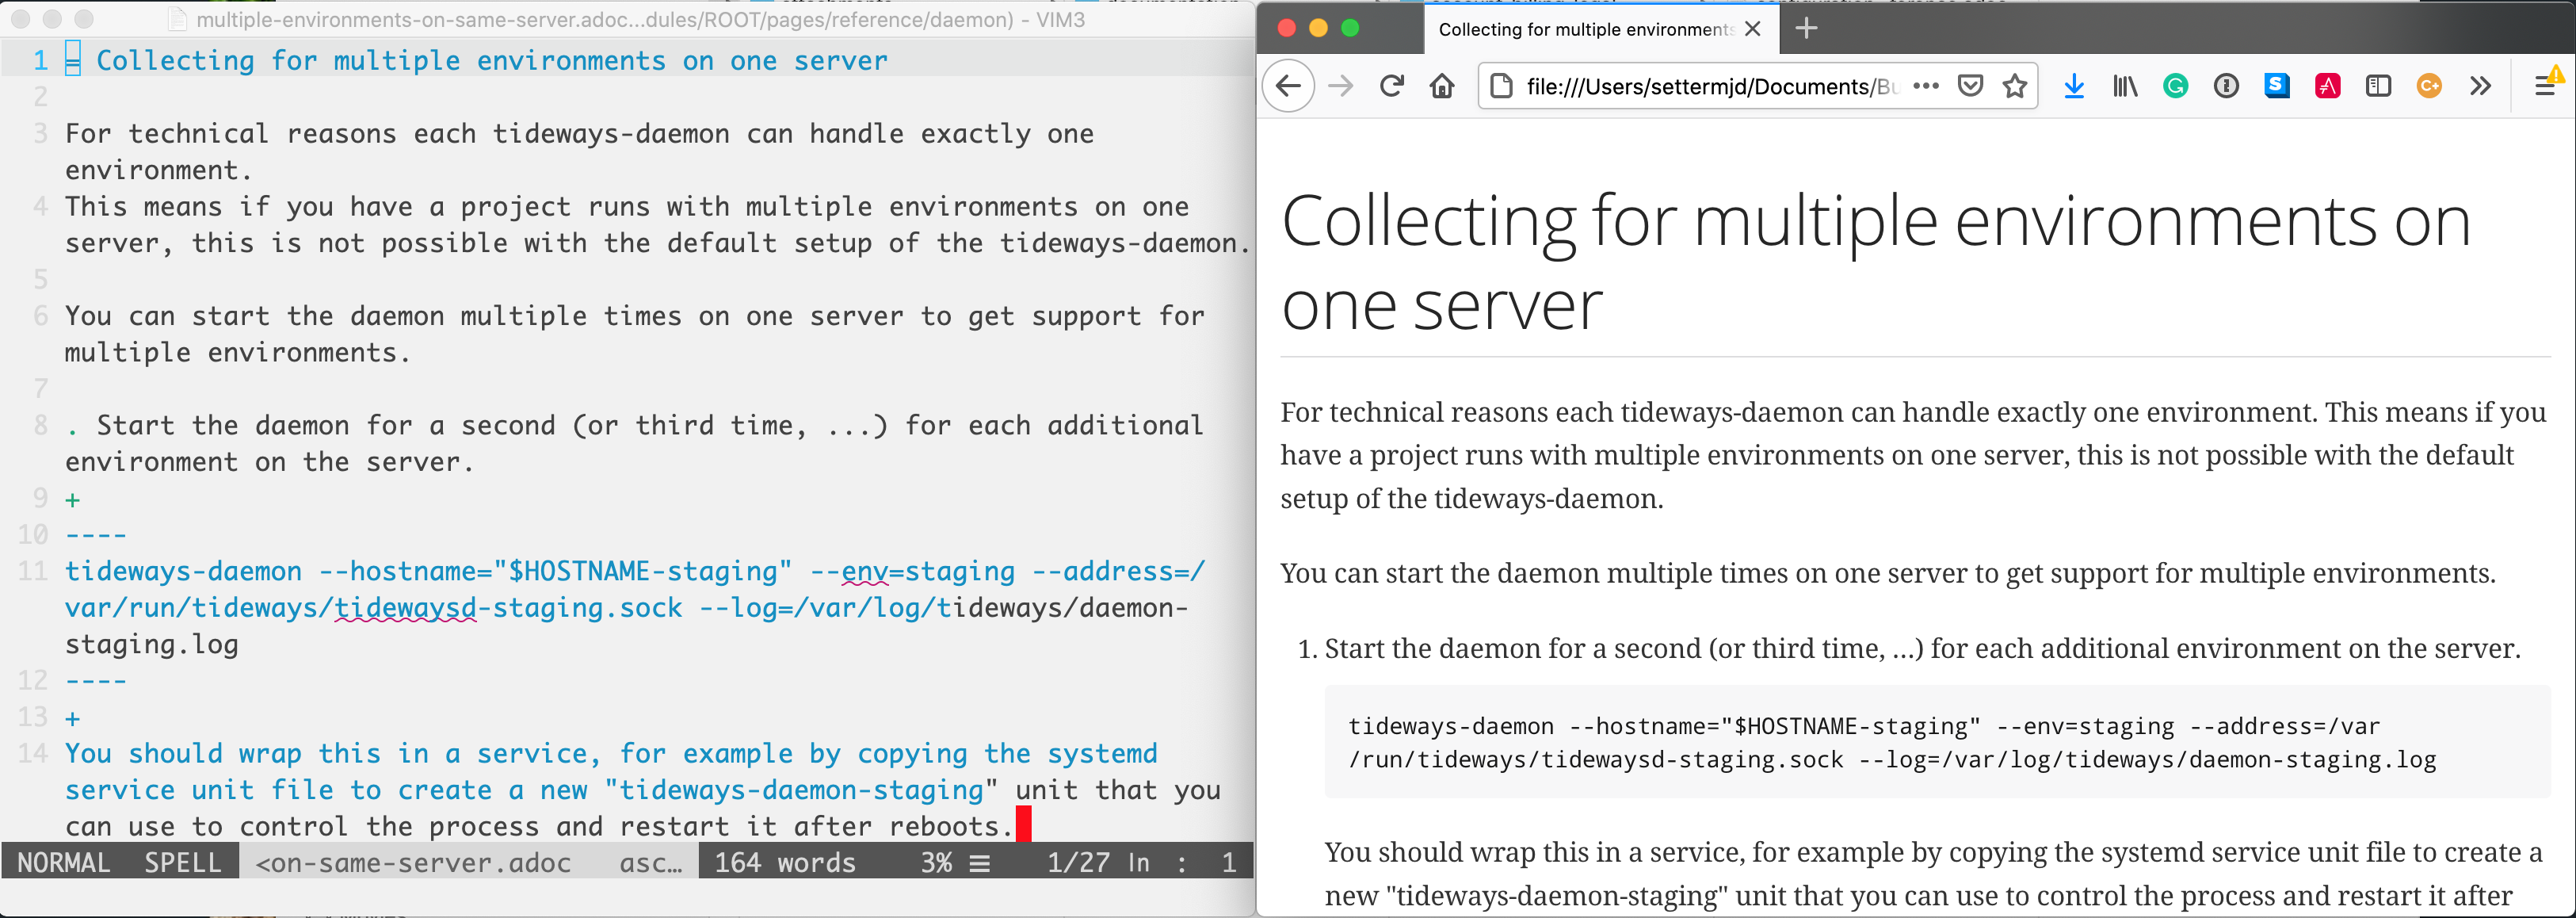 Writing AsciiDoc in Vim and previewing it in Firefox with the AsciiDoc LivePreview.js add-on